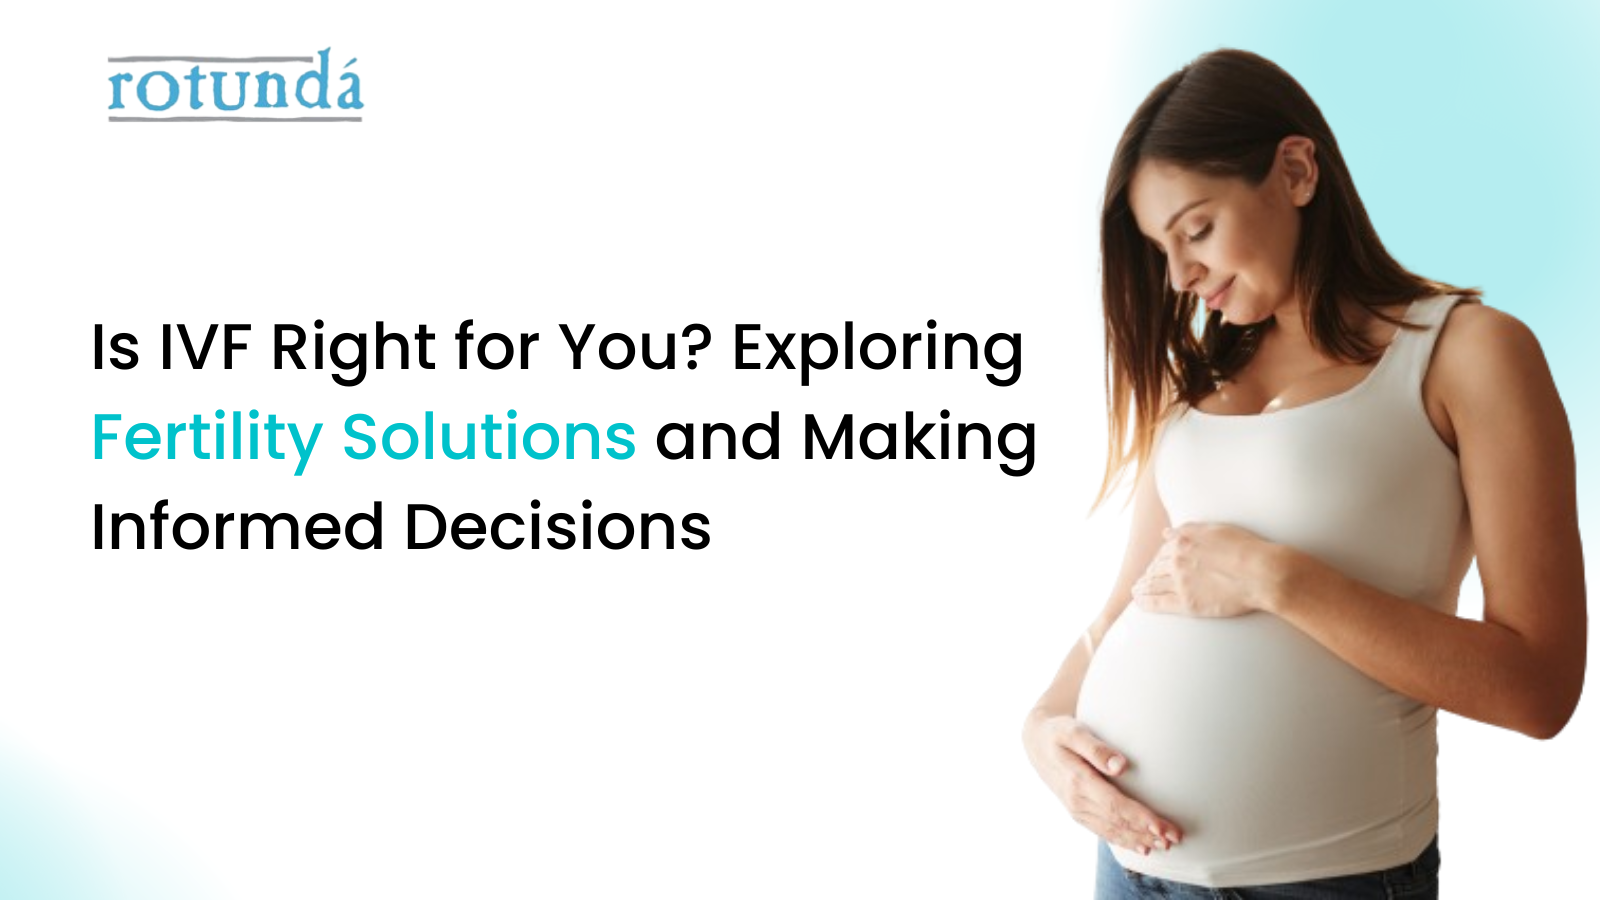 Is IVF Right for You? Exploring Fertility Solutions and Making Informed Decisions